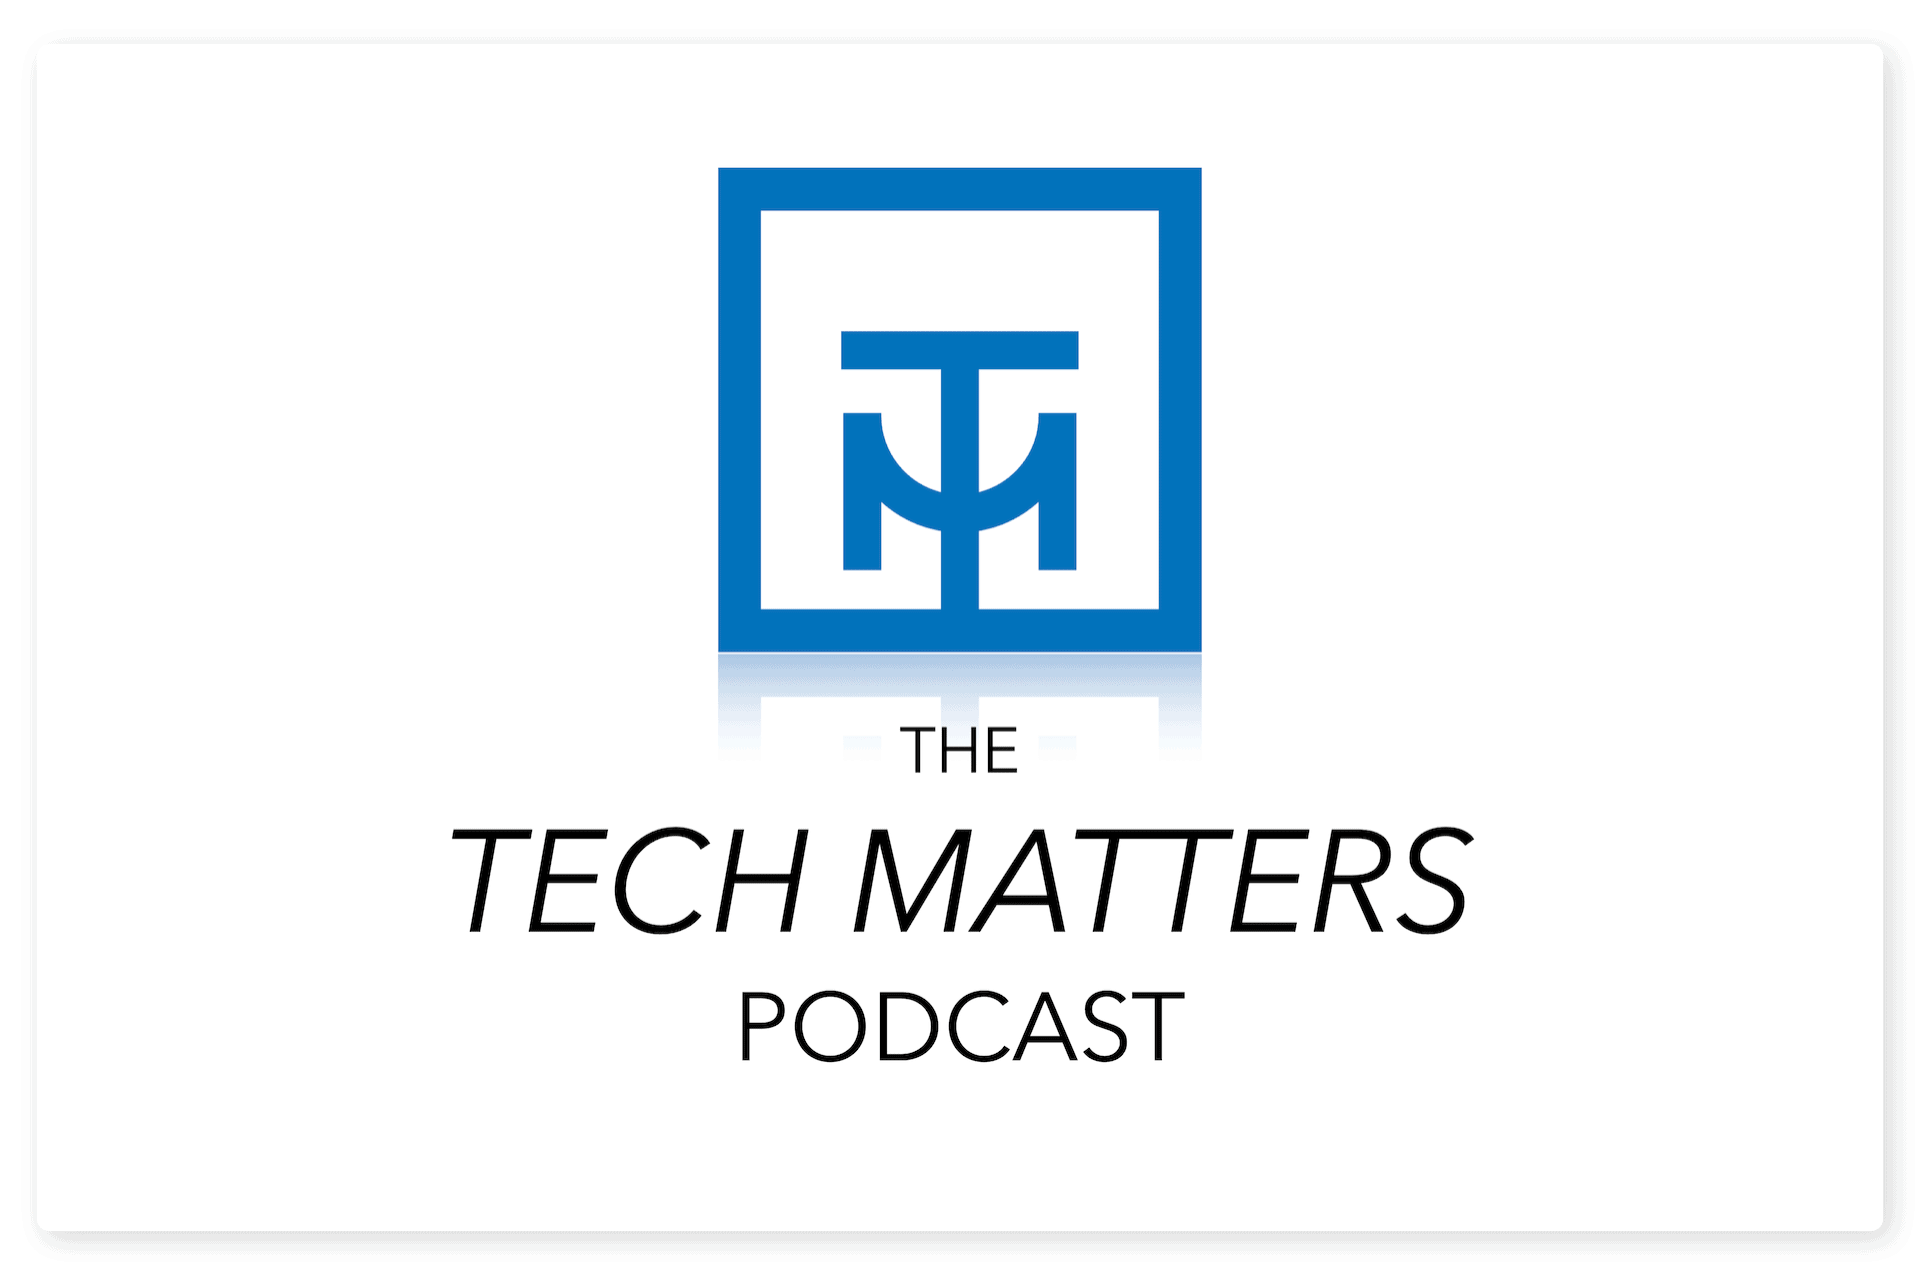 The Tech Matters Podcast